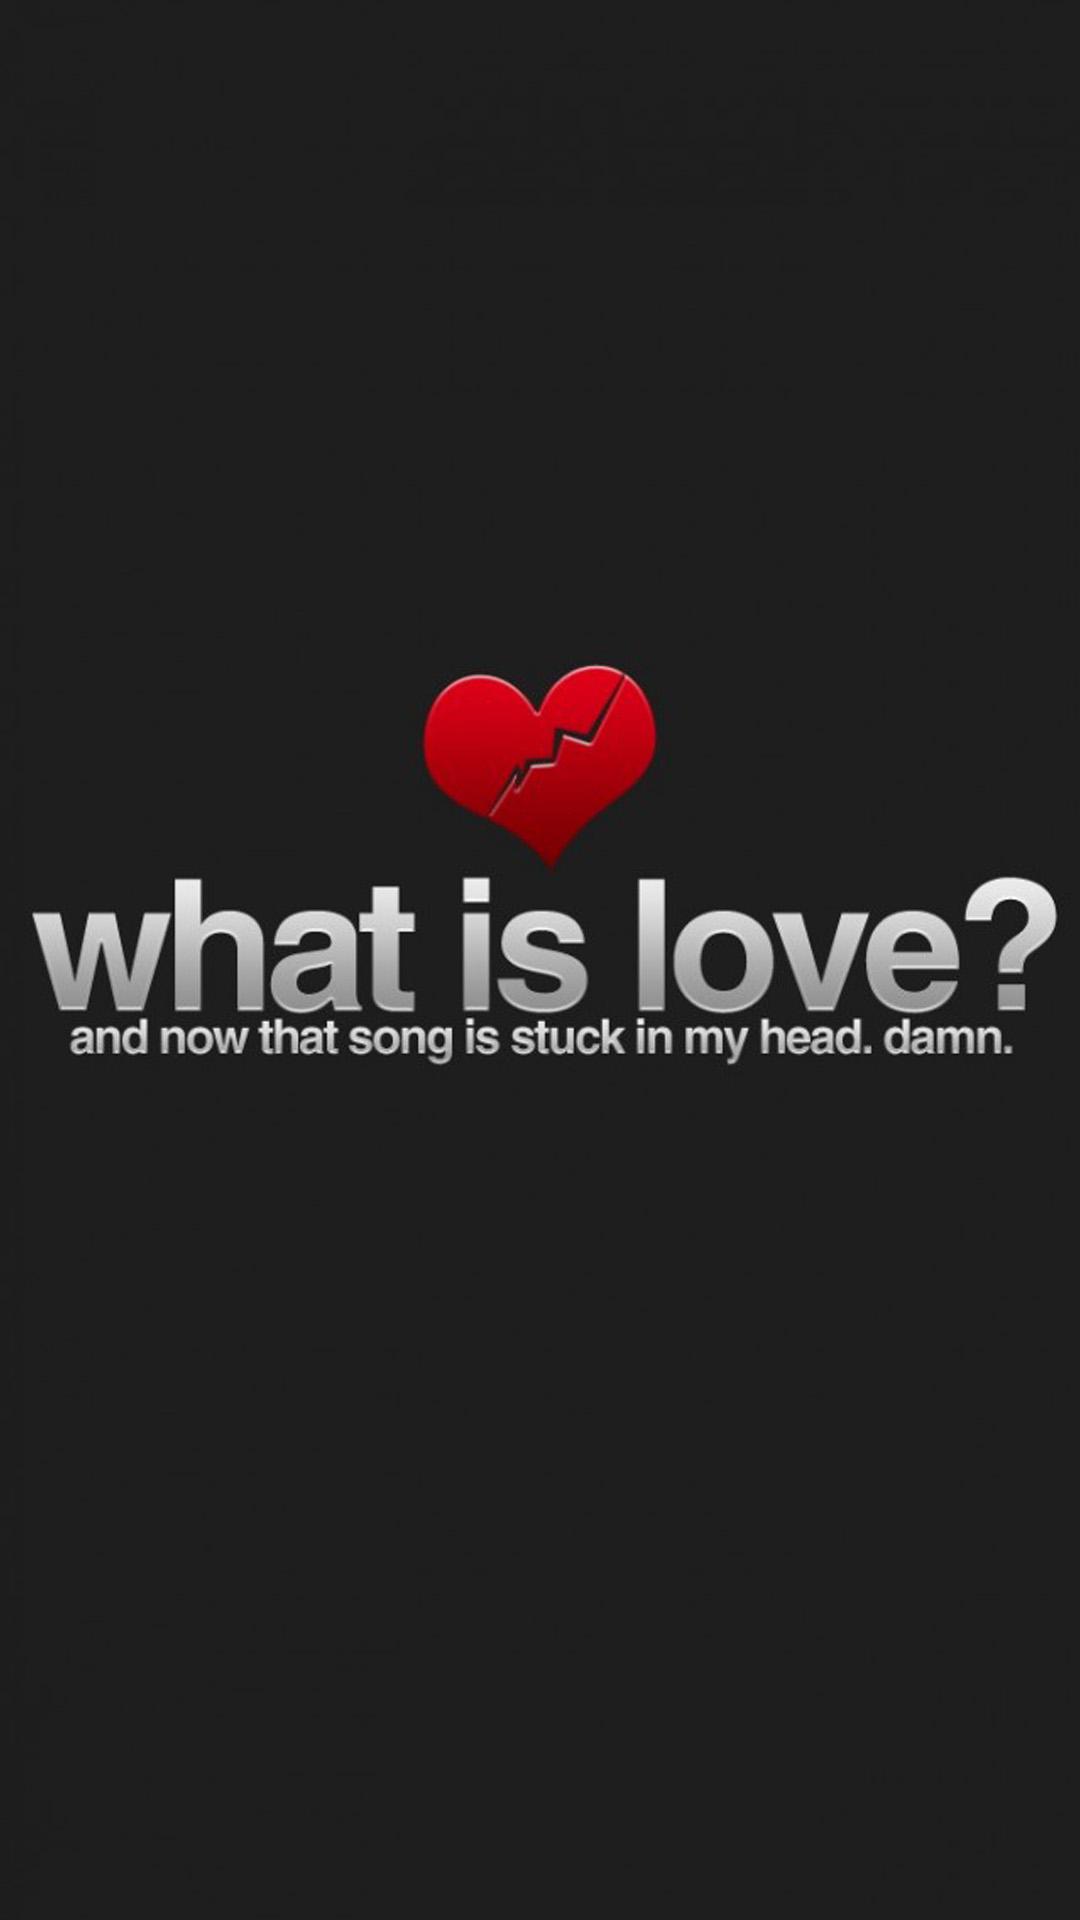 What Is Love Song Stuck In My Head Android Wallpaper free download